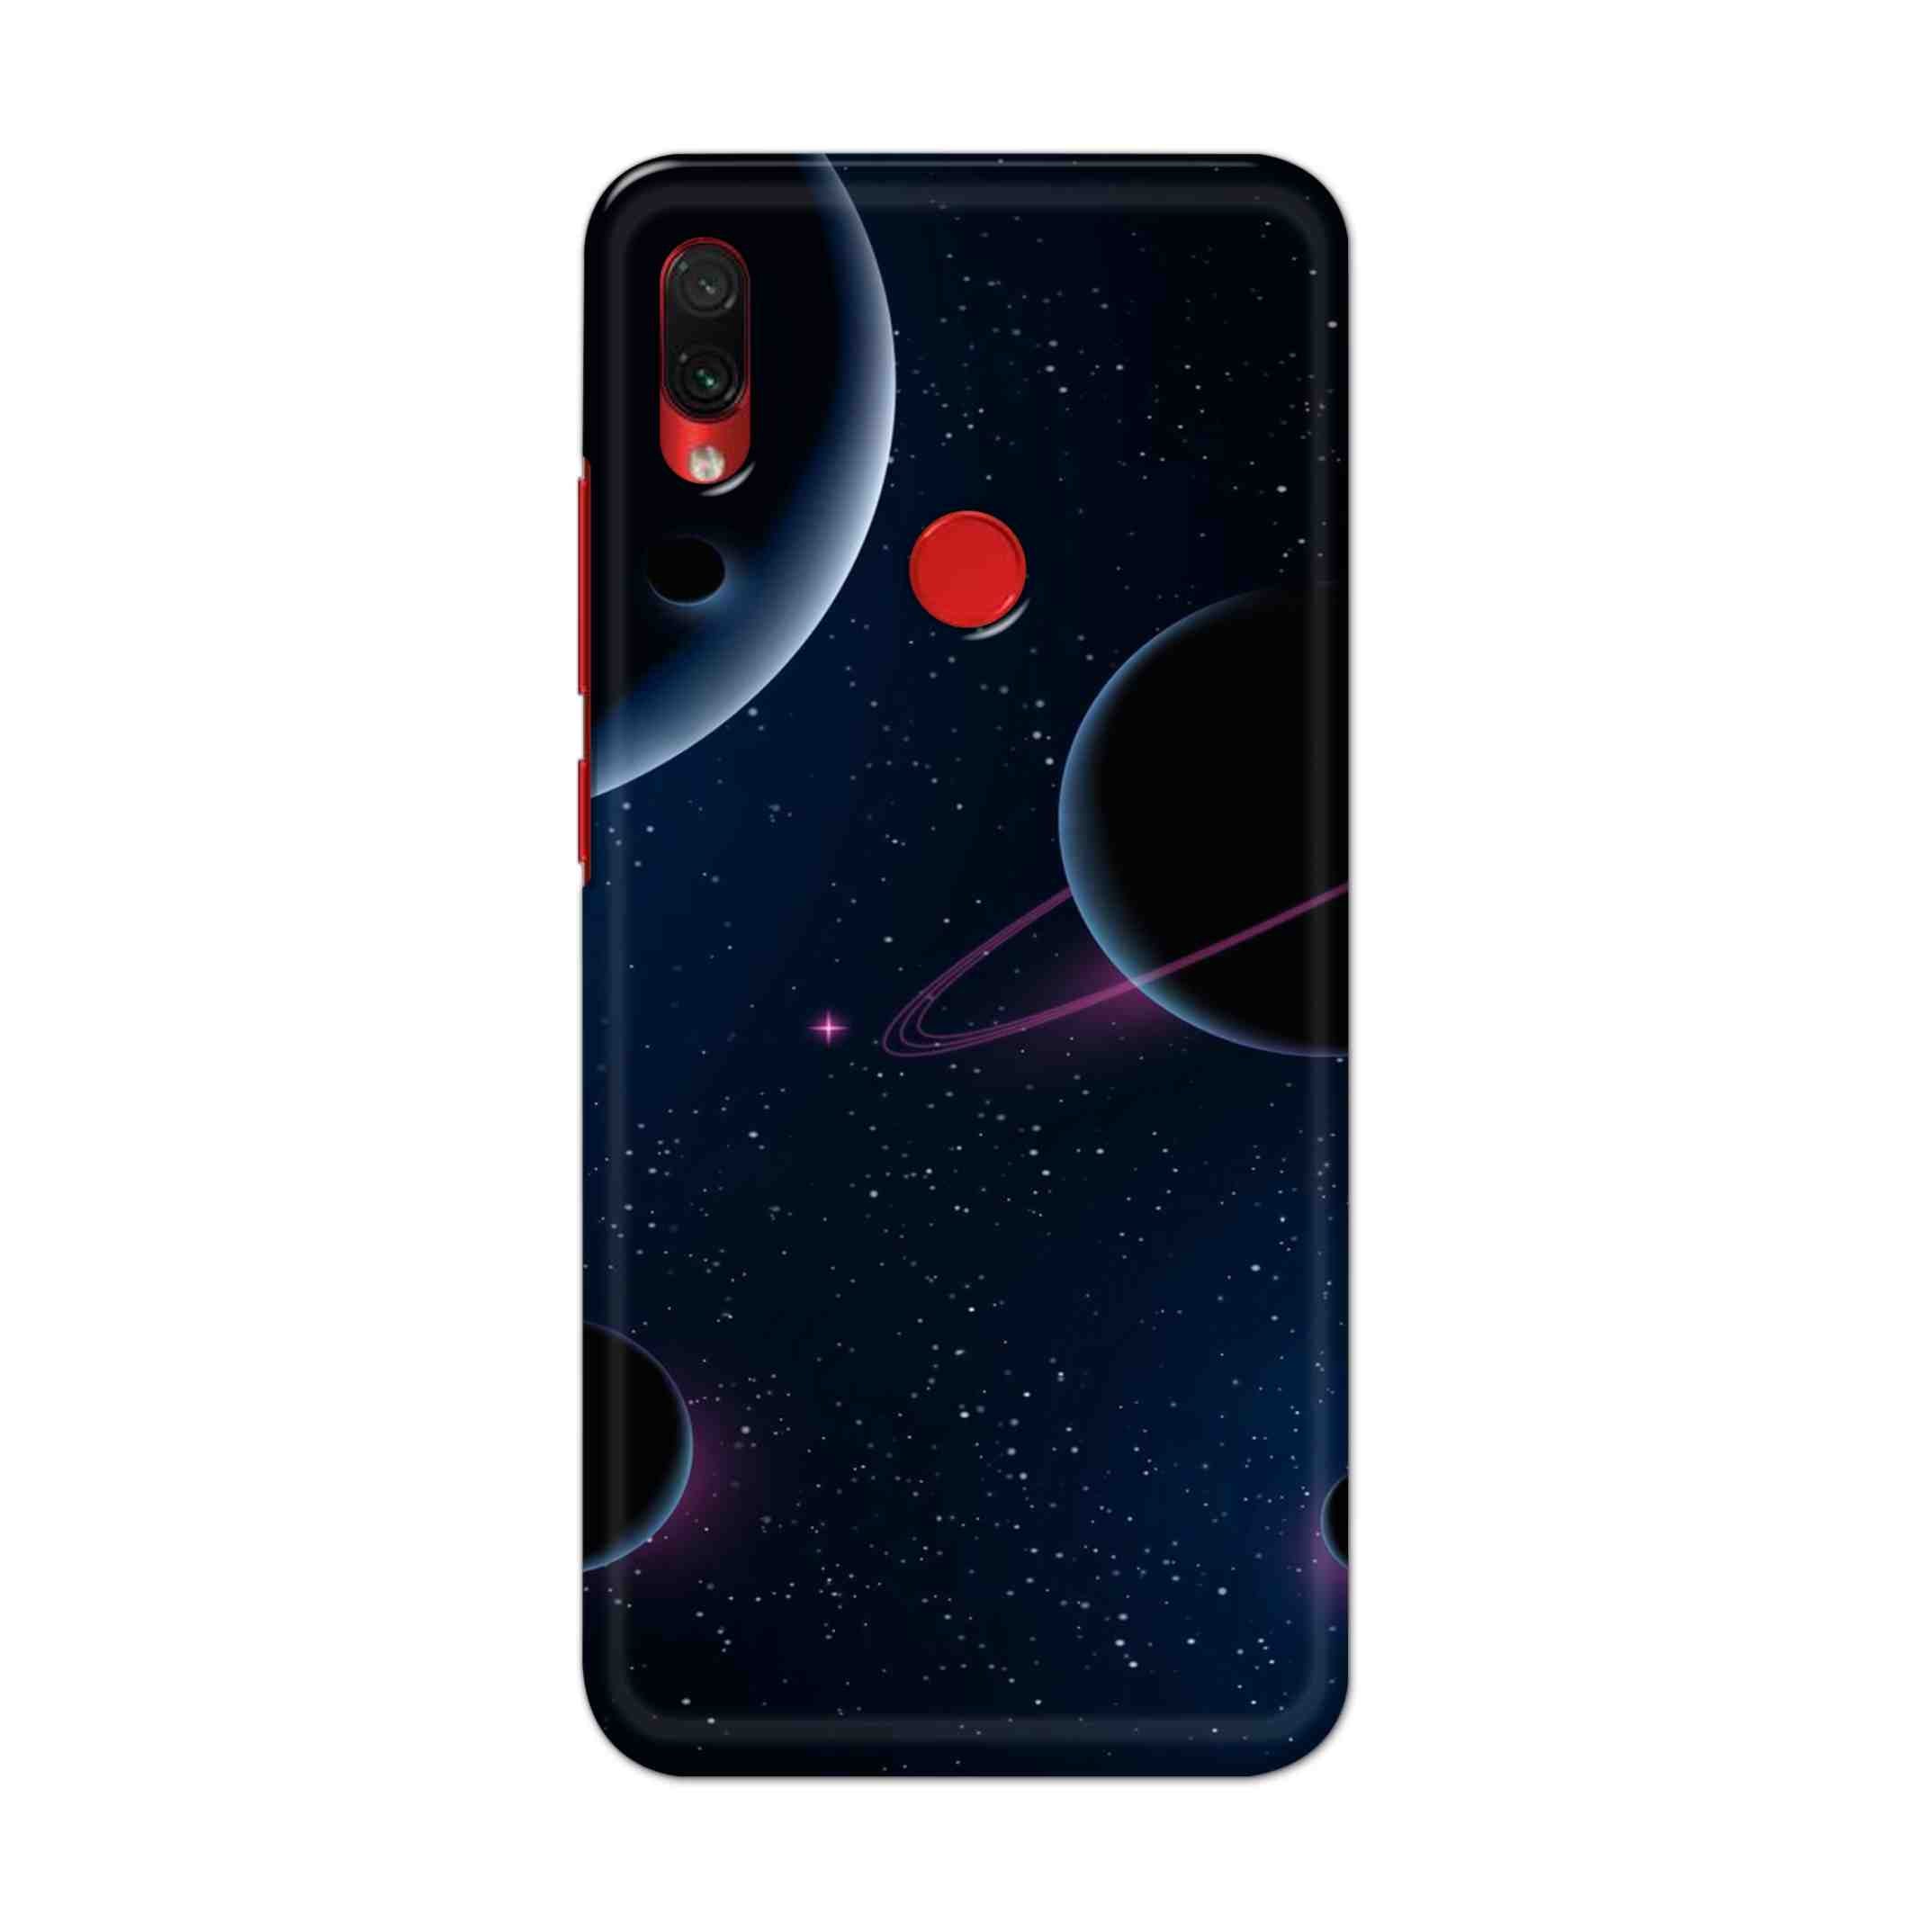 Buy Night Space Hard Back Mobile Phone Case Cover For Xiaomi Redmi Note 7S Online